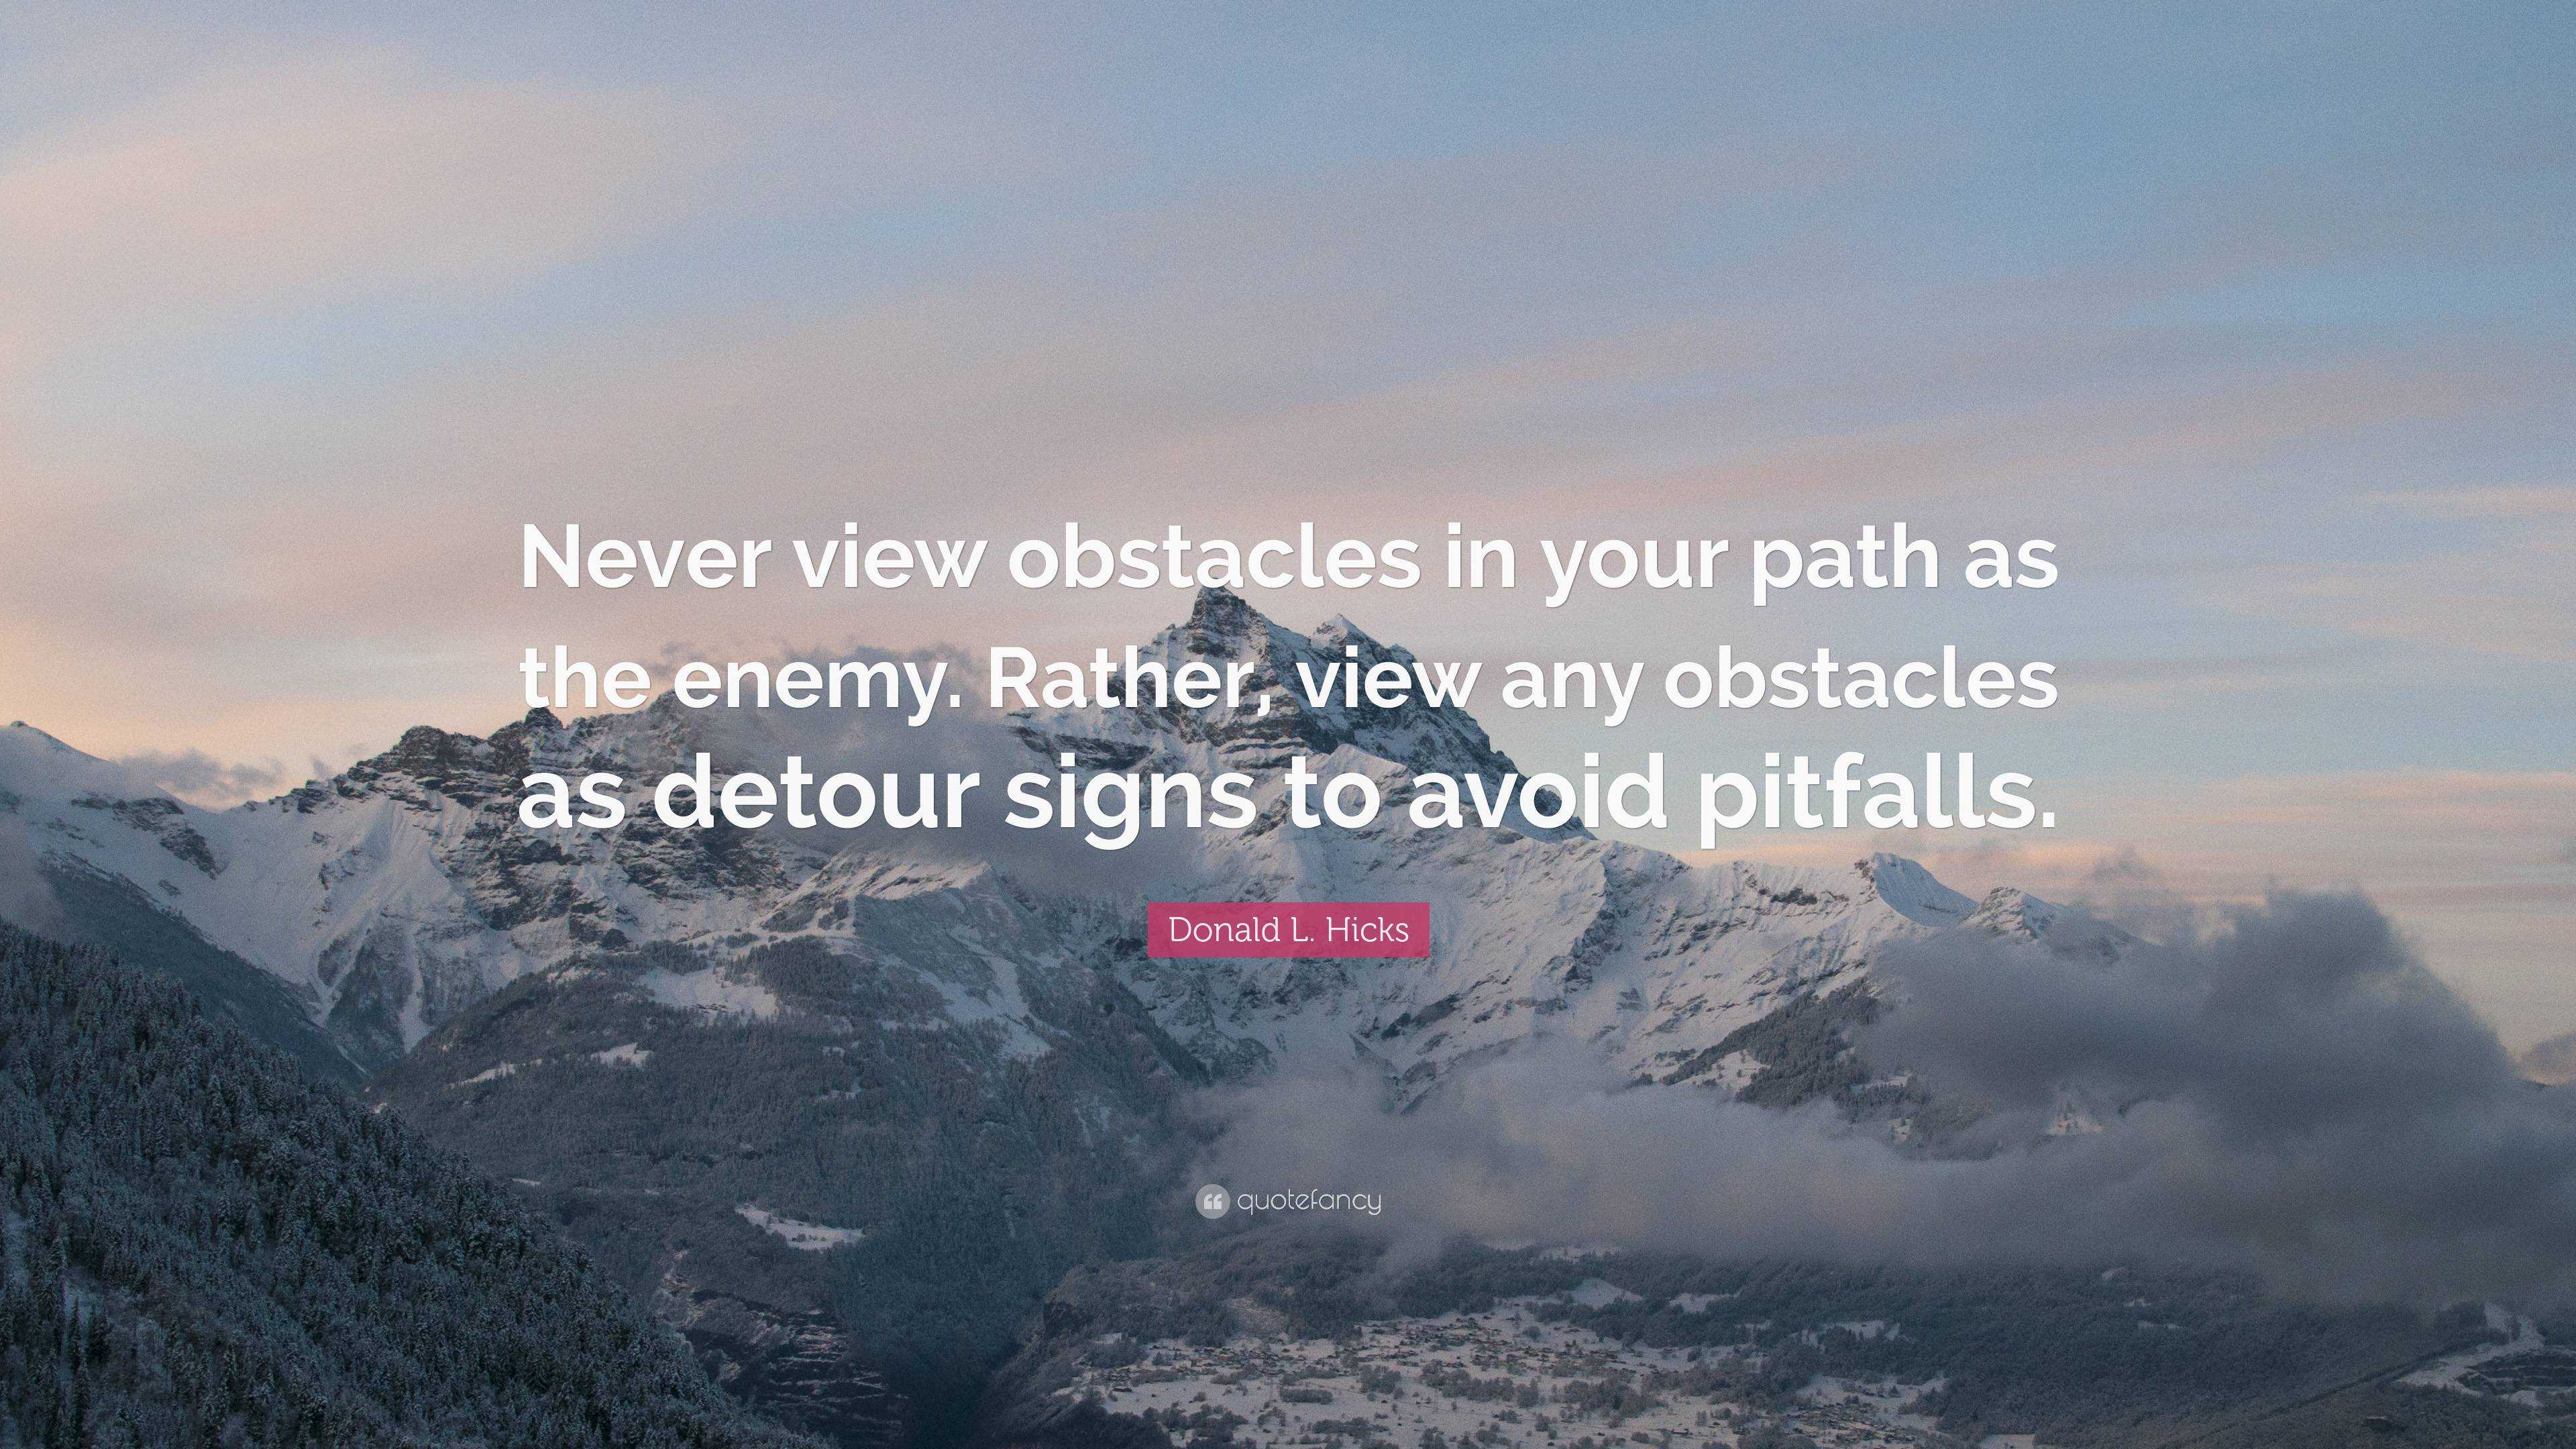 Donald L. Hicks Quote: “Never view obstacles in your path as the